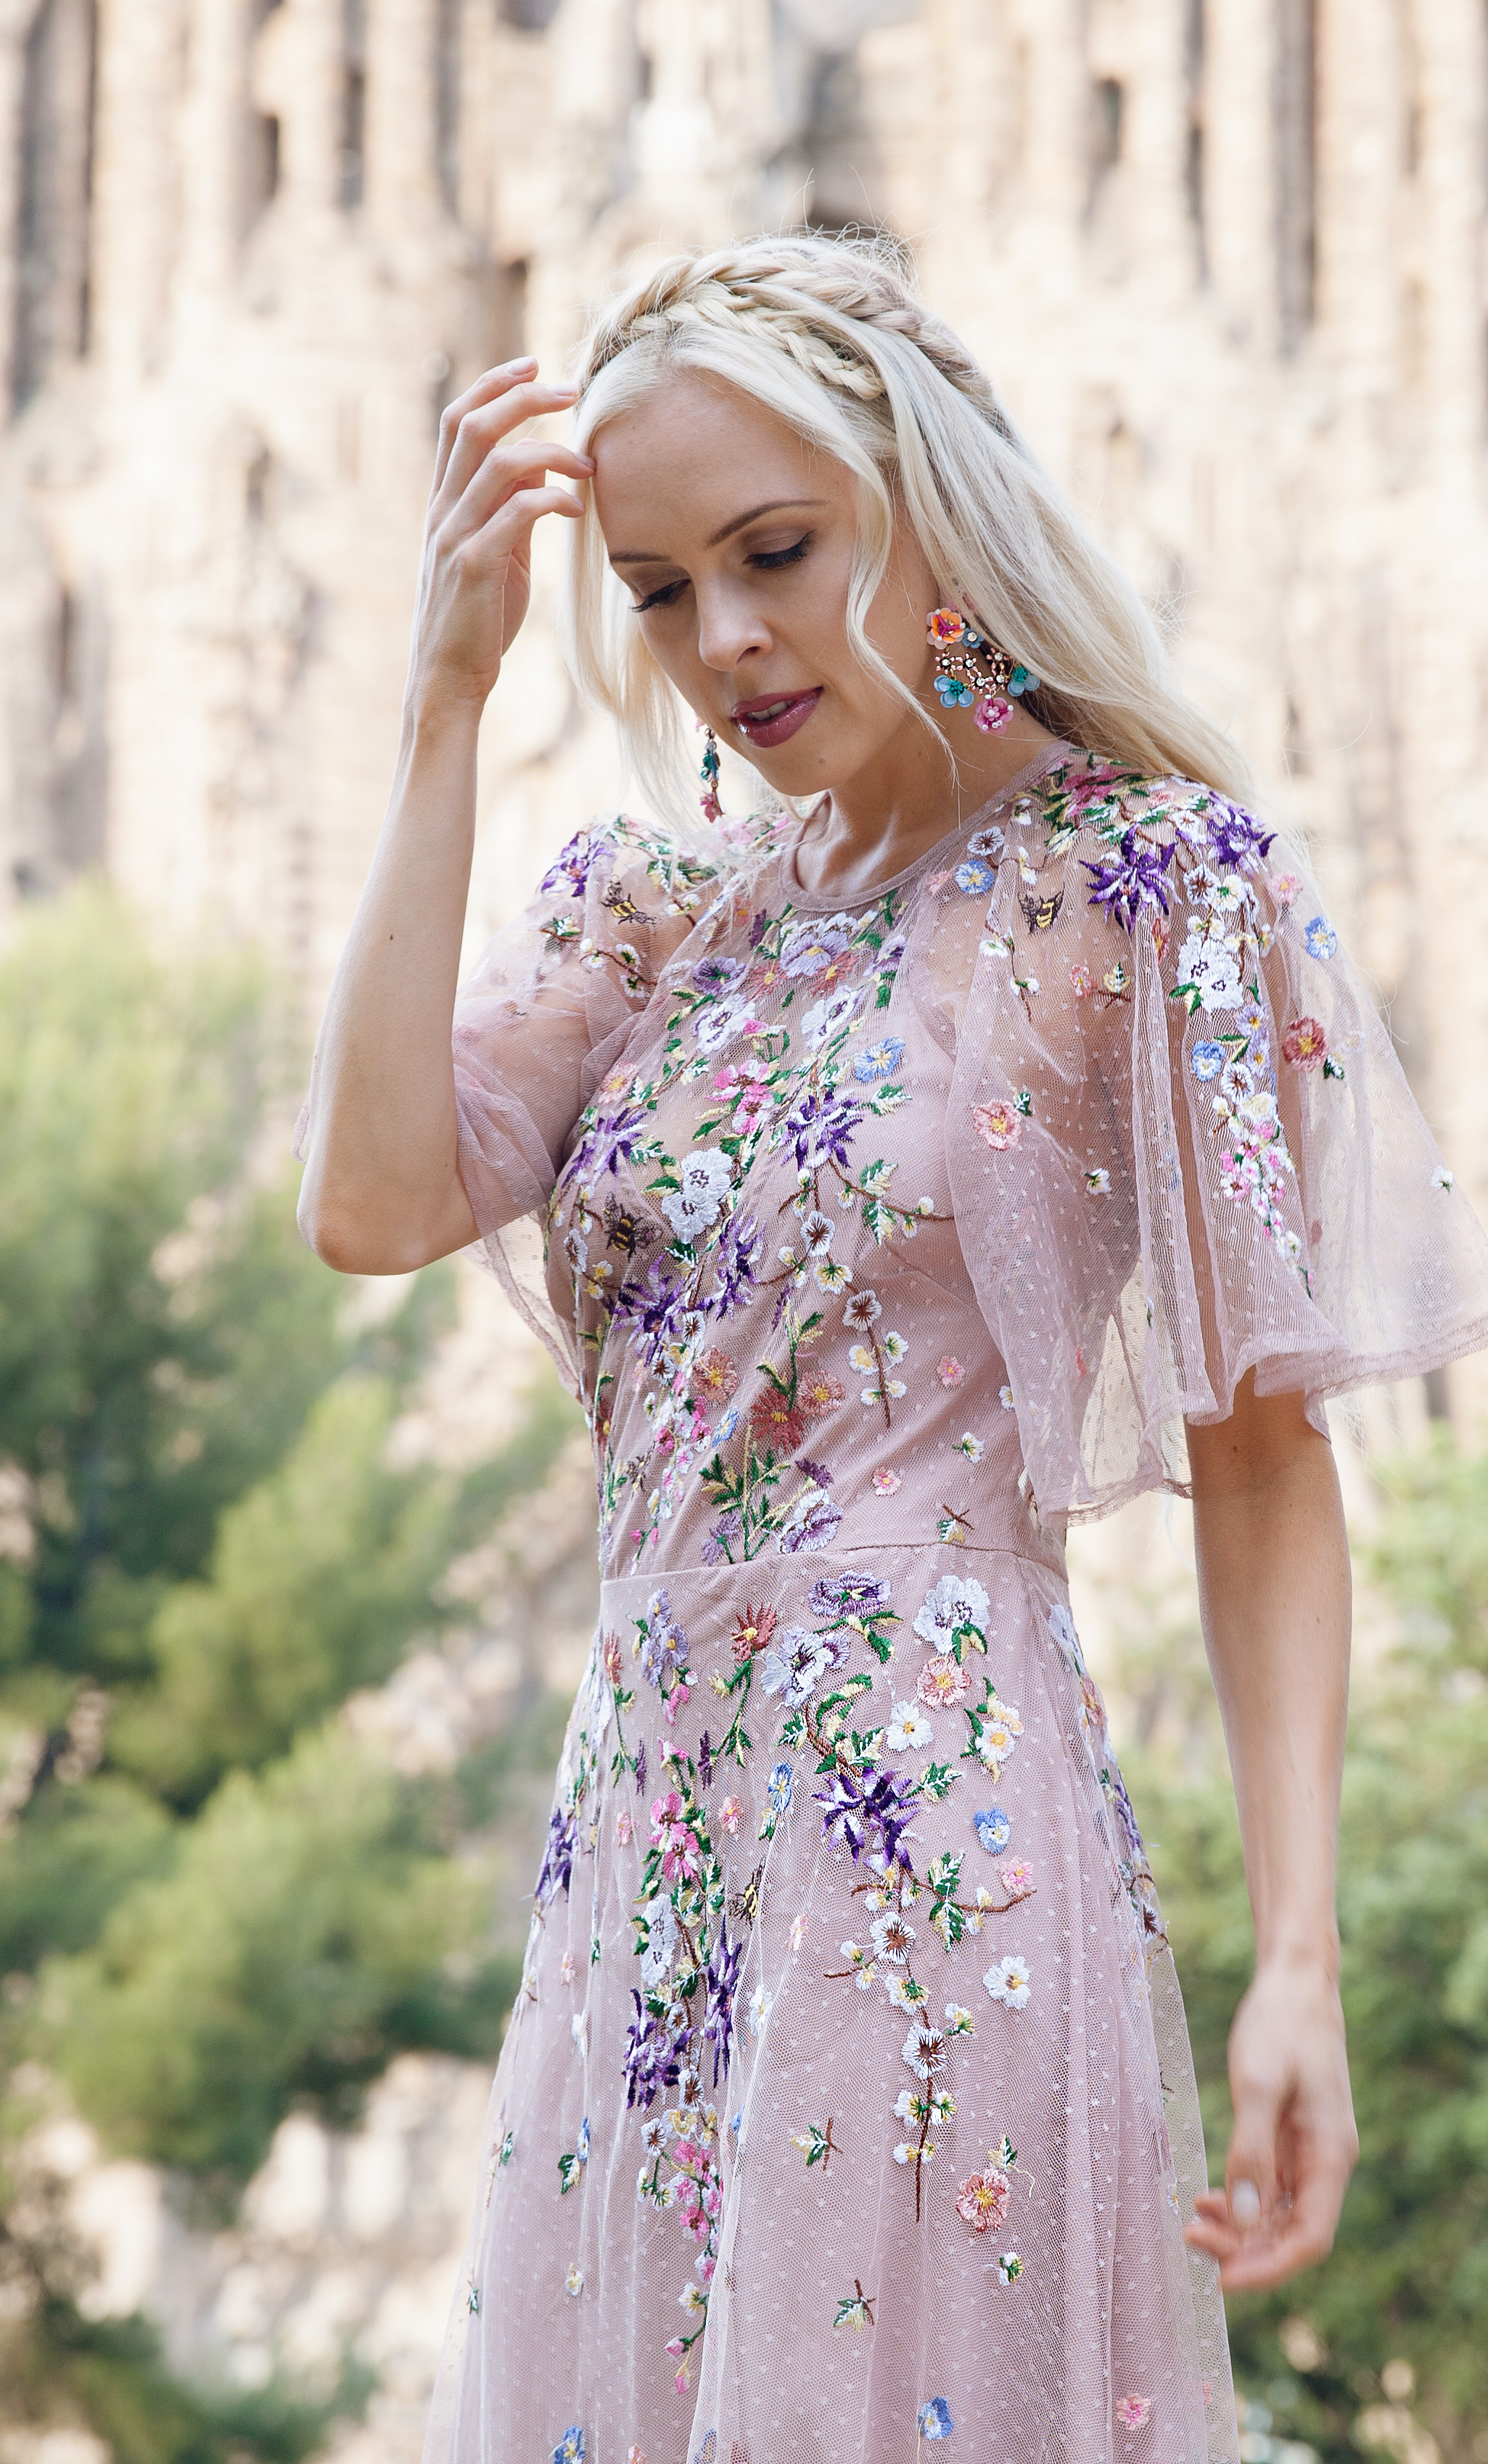 ASOS DESIGN Bridesmaid floral embroidered dobby mesh flutter sleeve maxi dress in barcelona  | ASOS floral embroidered maxi dress featured by top San Francisco fashion blog, Lombard and Fifth: image of a blonde woman wearing a floral maxi dress at the Colosseum in Rome